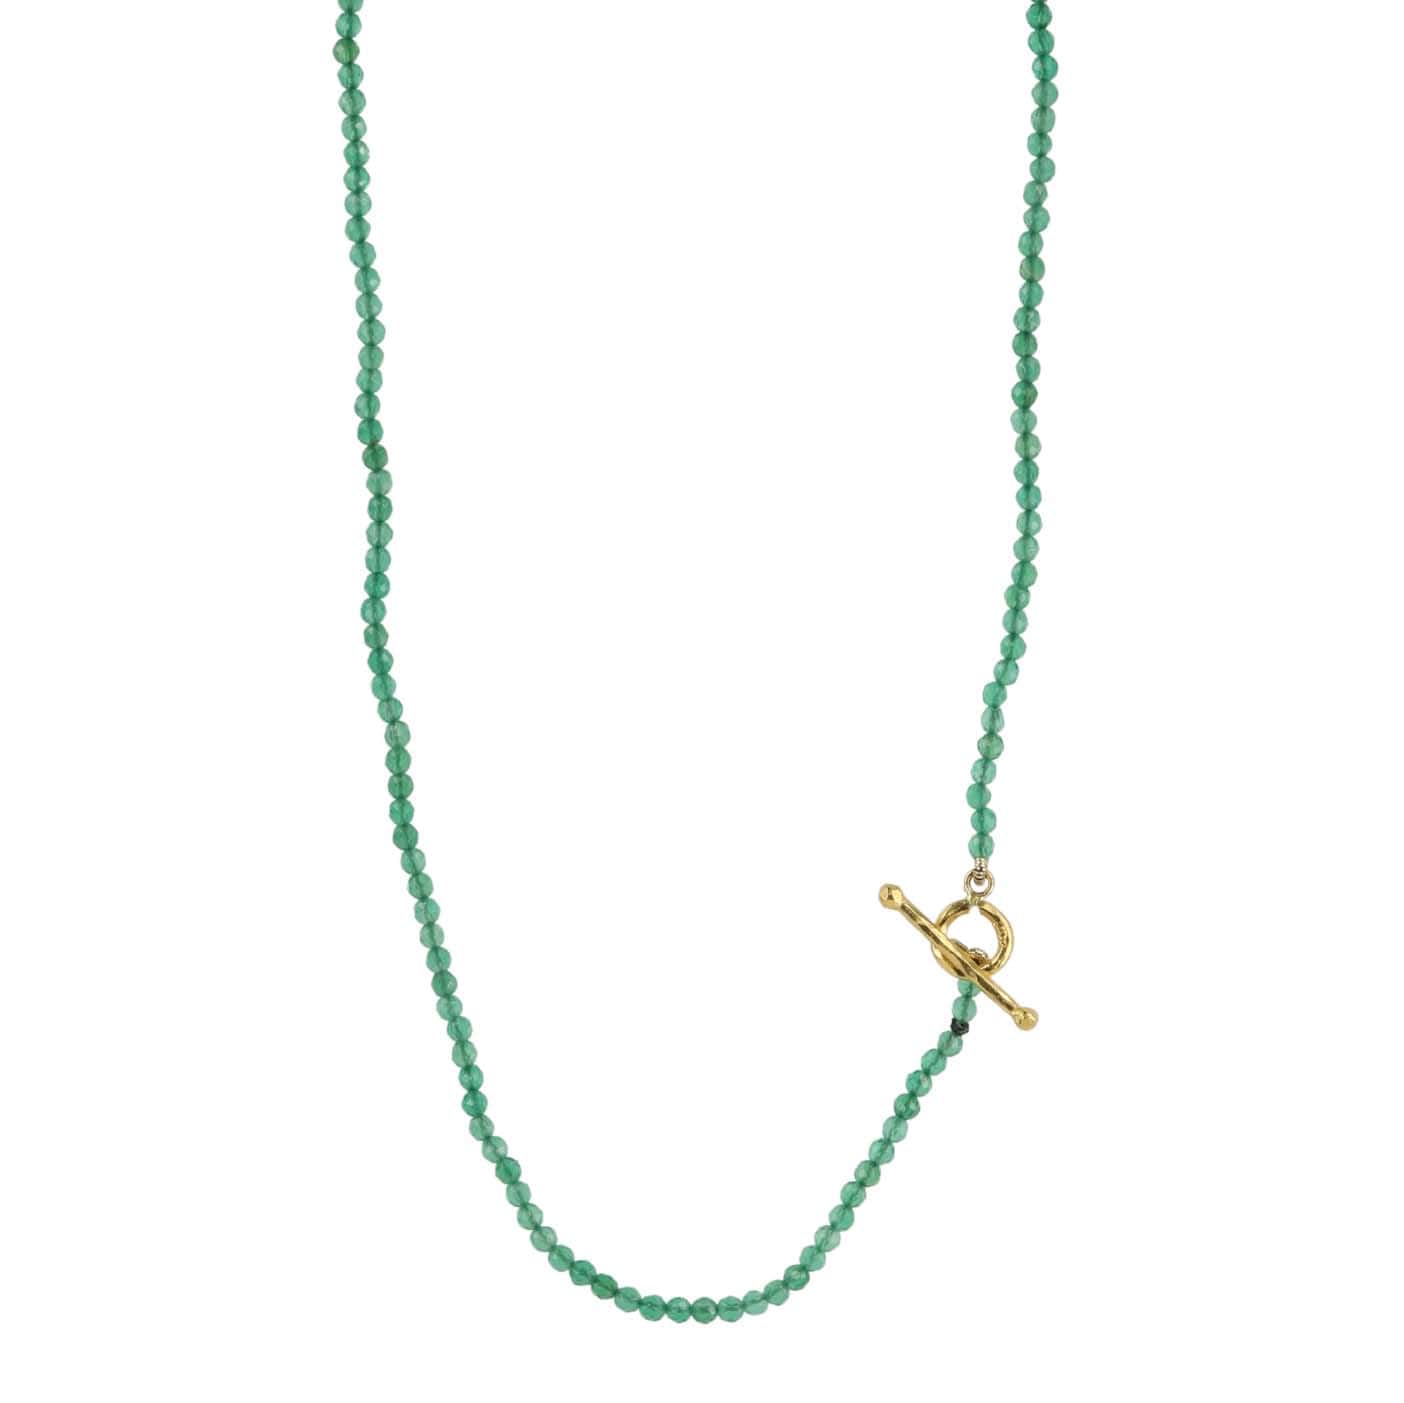 Cathy Waterman Green Onyx Beaded Necklace with 22K Gold Toggle Clasp